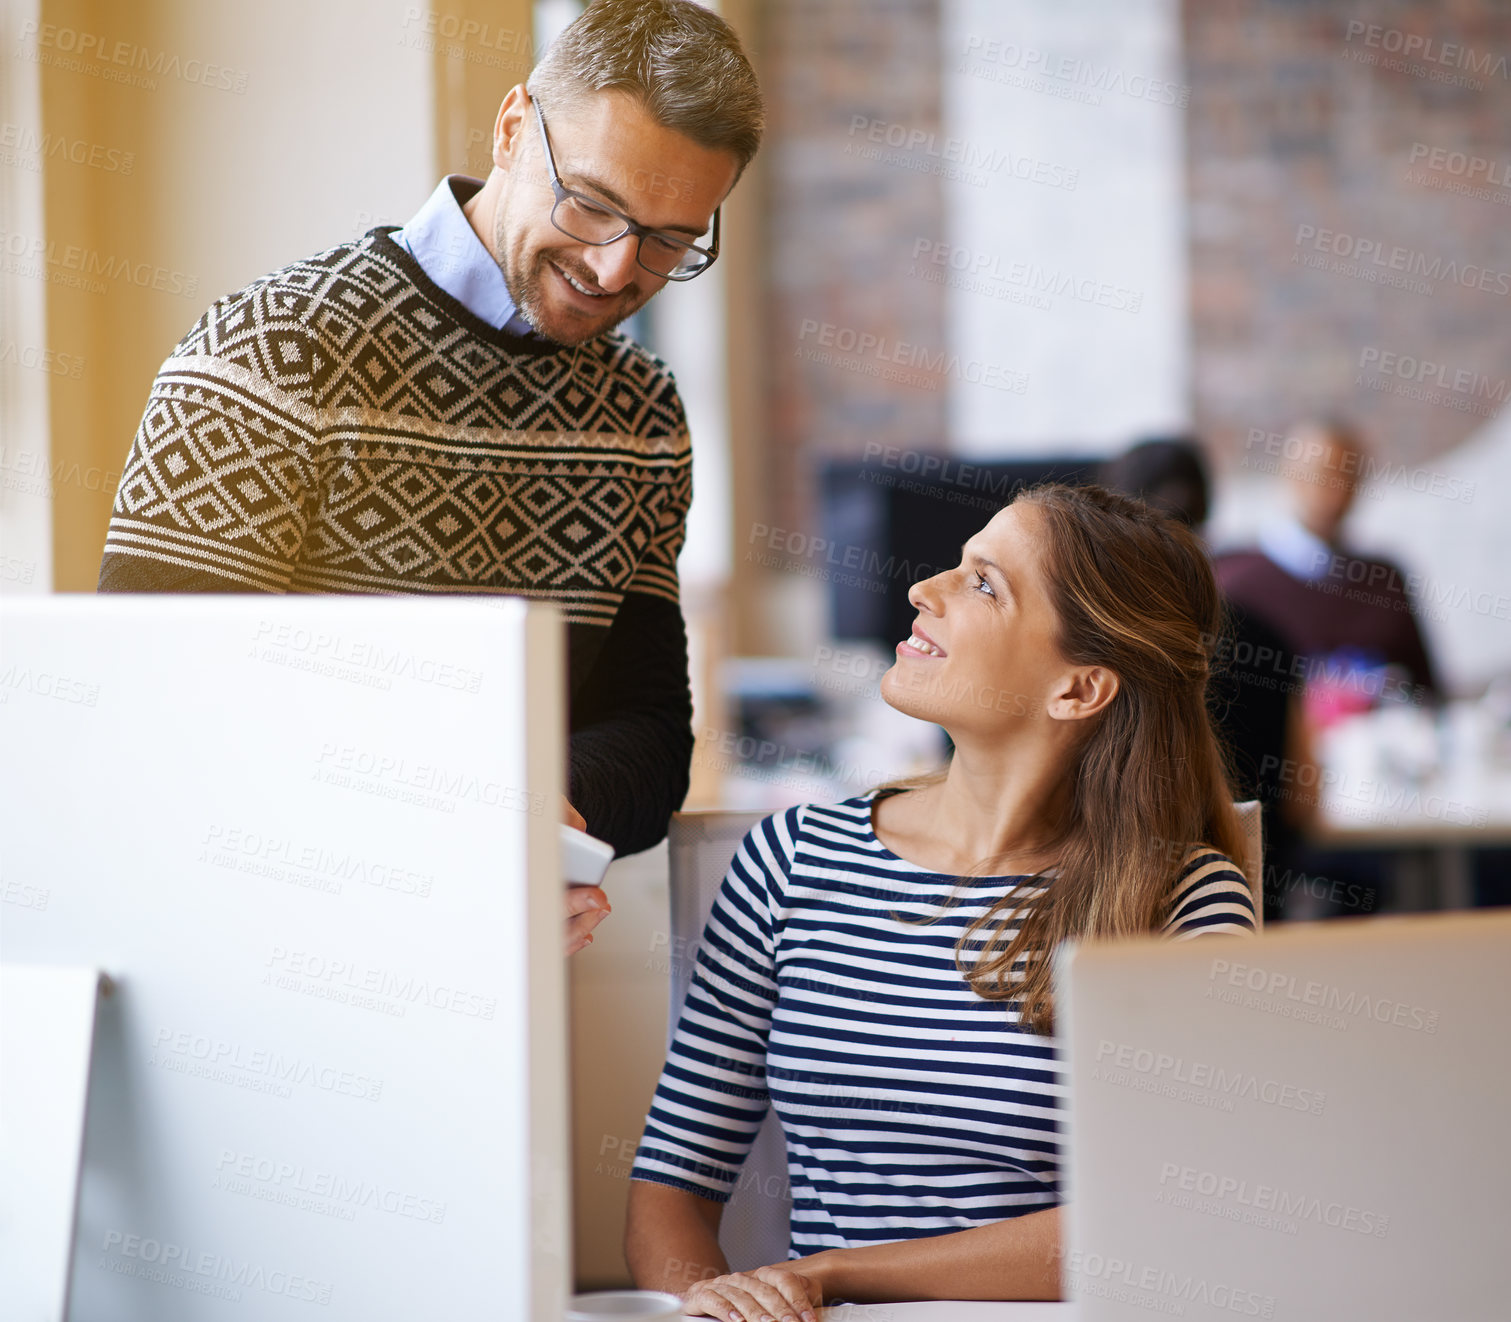 Buy stock photo Shot of two designers working together at a computer